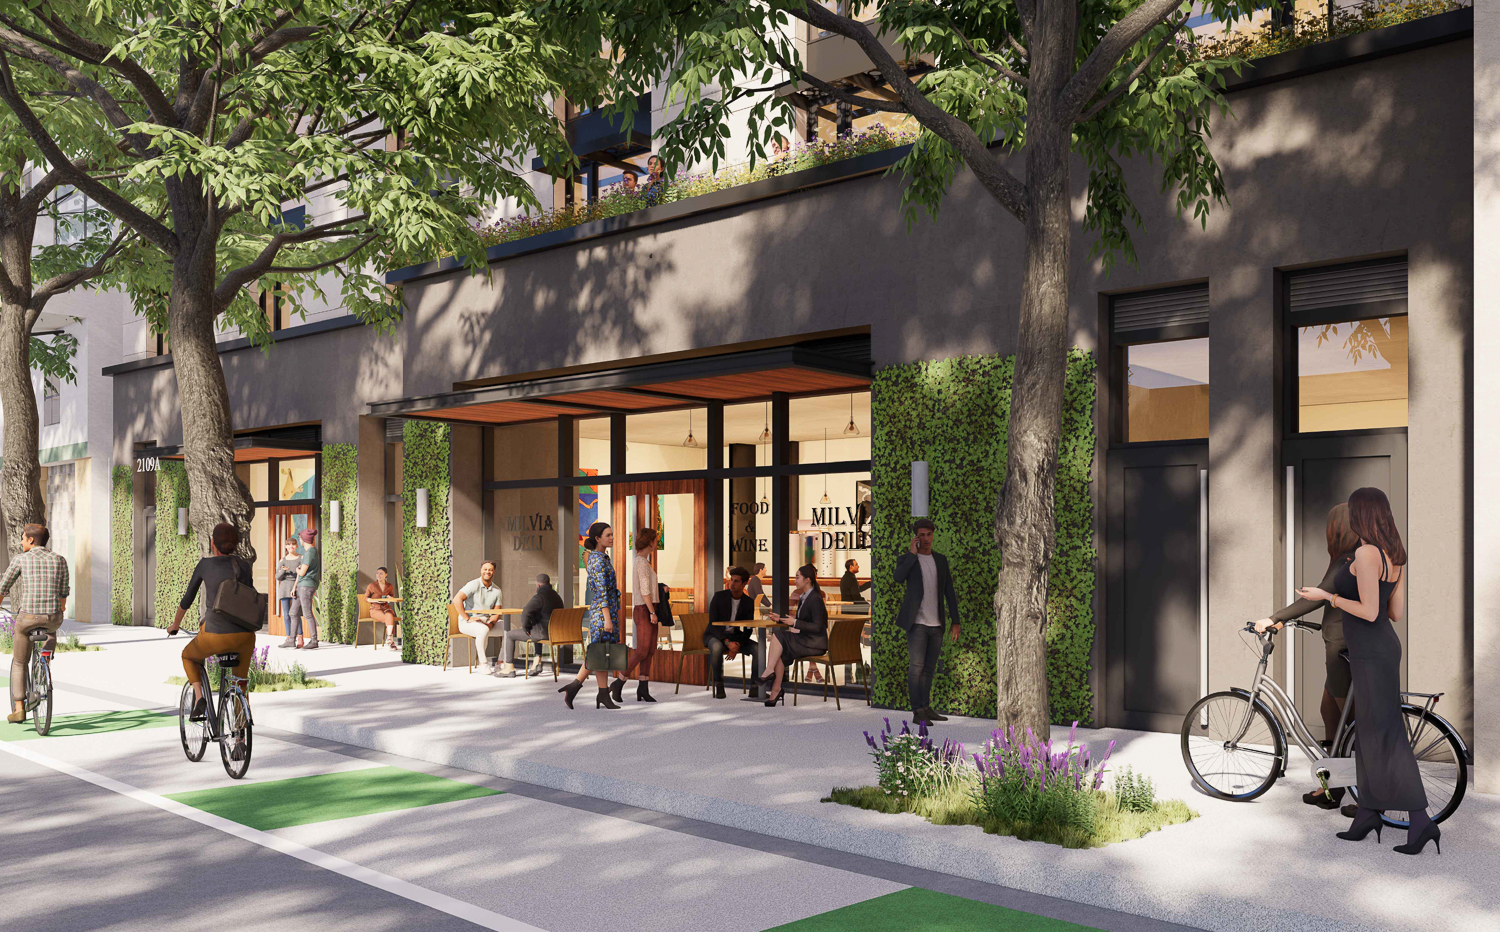 2109 Milvia Street retail space, rendering by Trachtenberg Architects